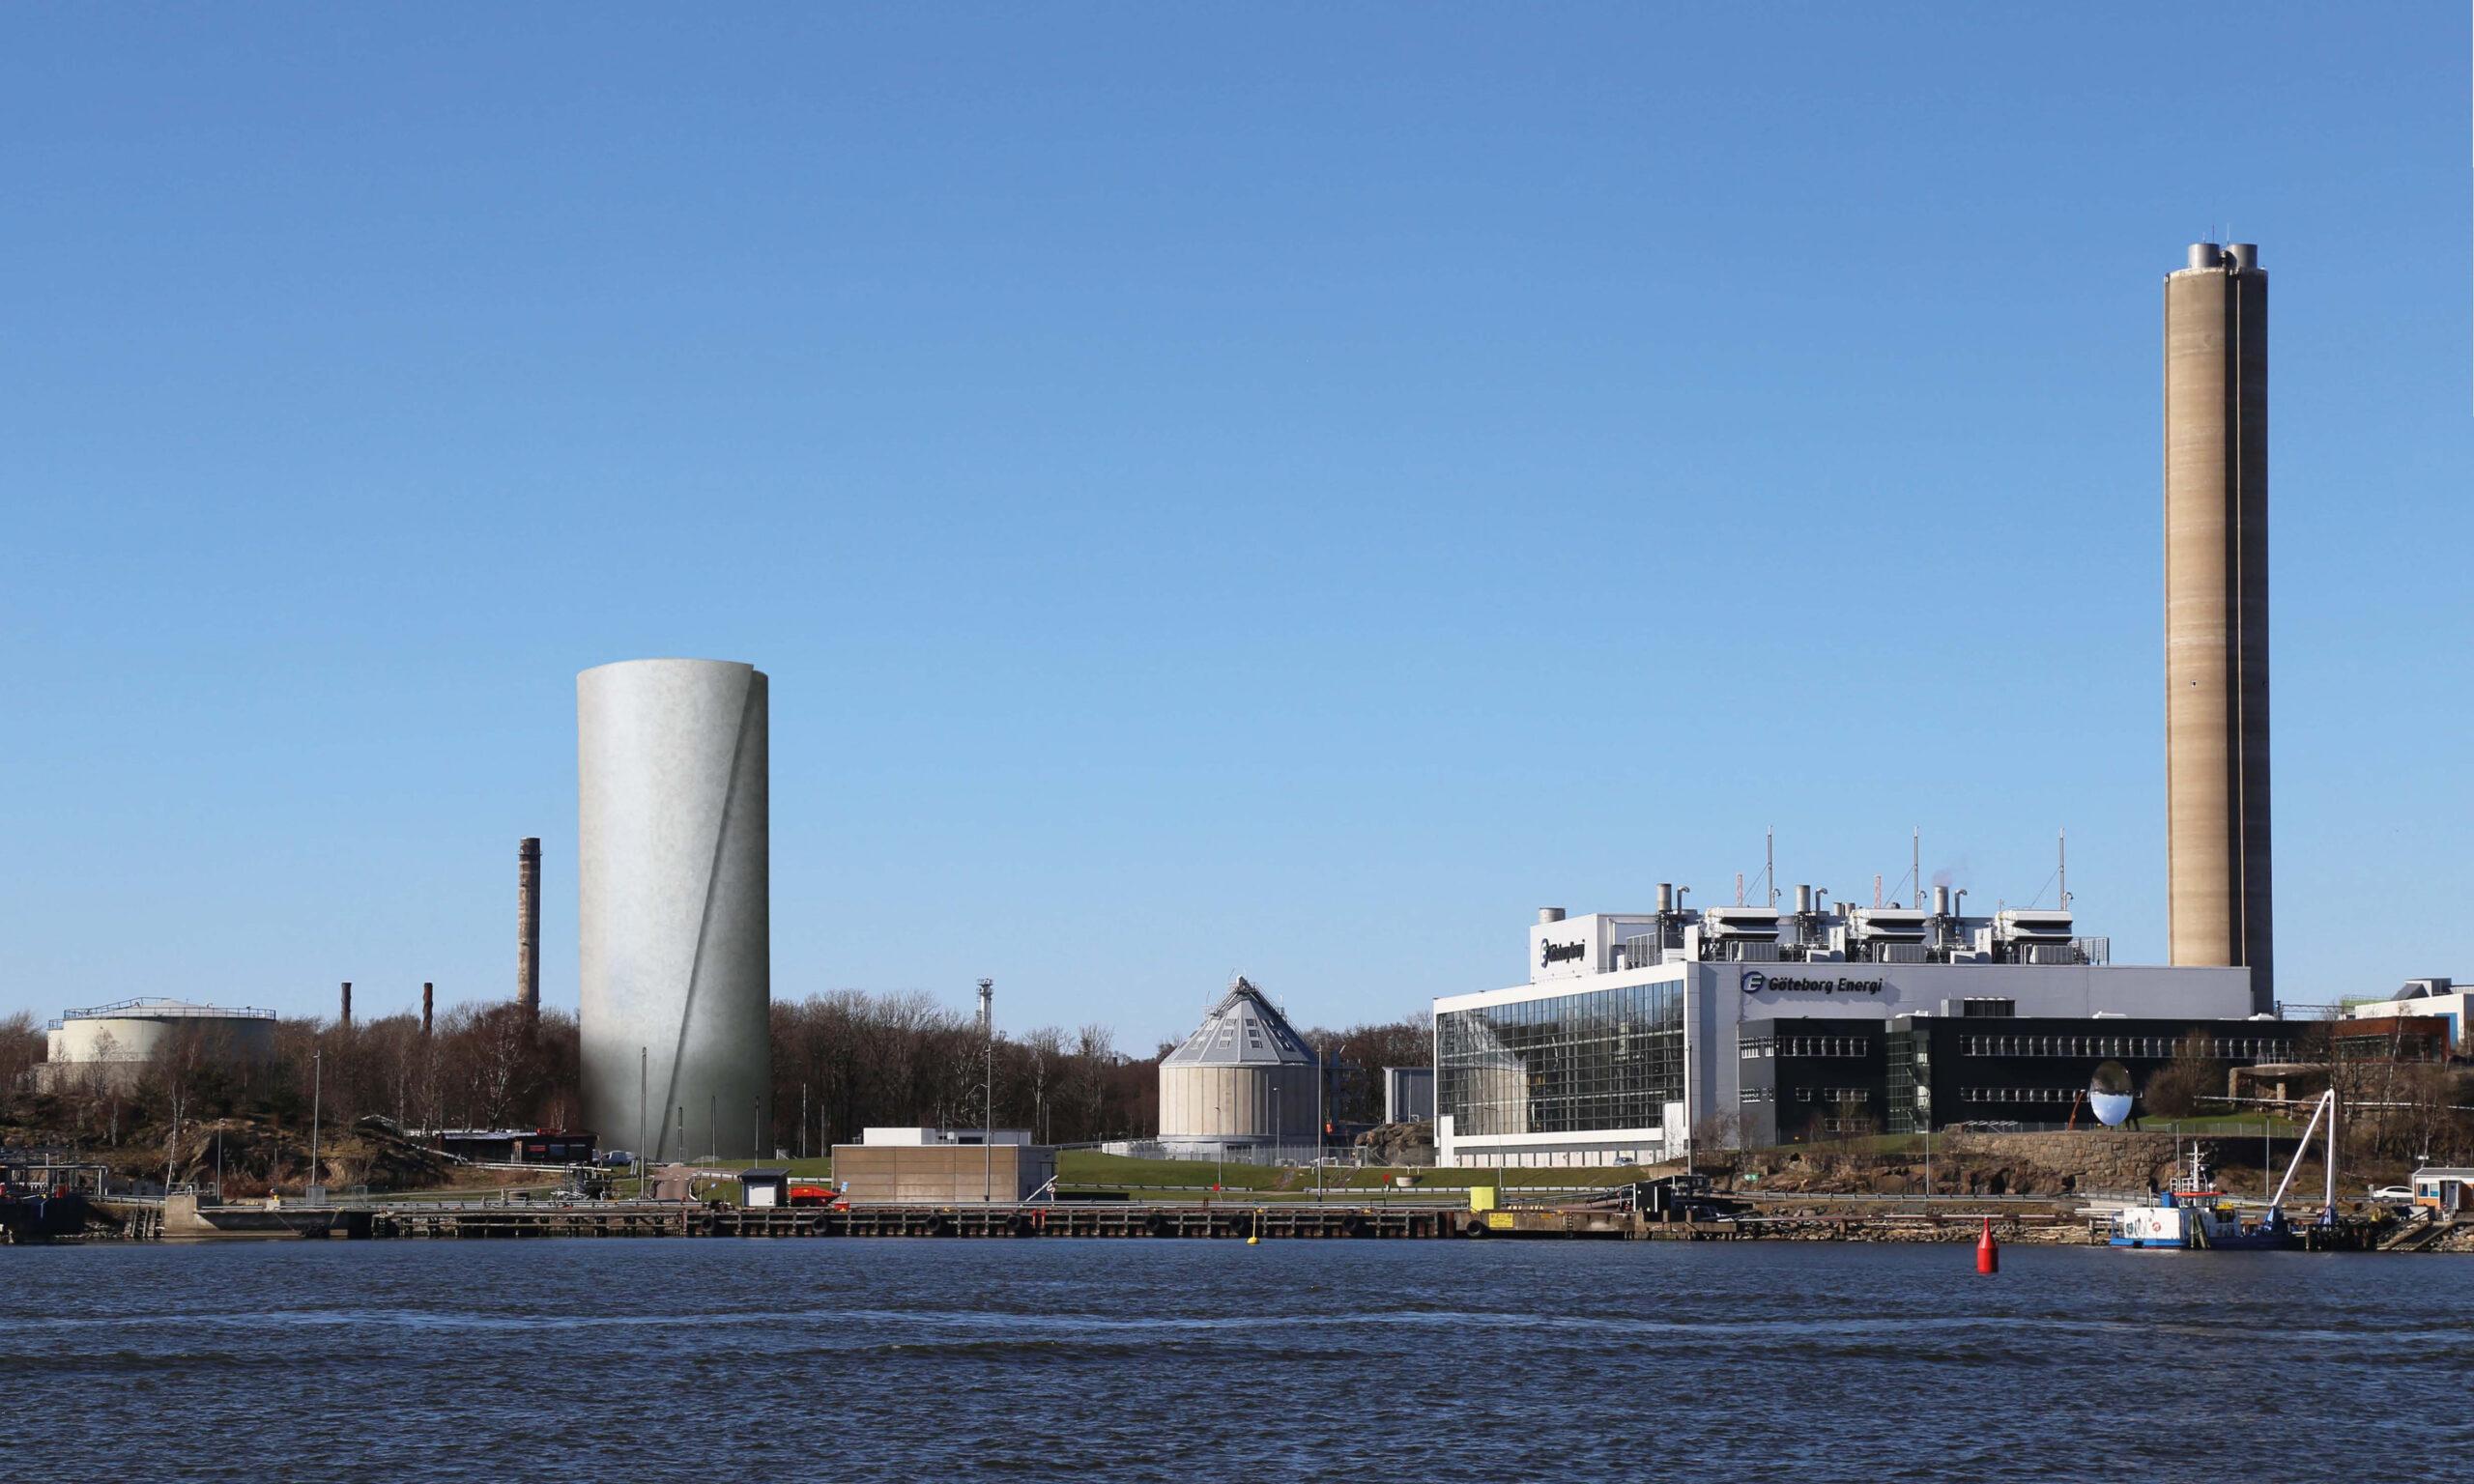 A distric heating facility in Gothenburg, a tall and wide tower to the left; a tall and slim tower to the right. One of Gothenburg's initiatives for a greener future.